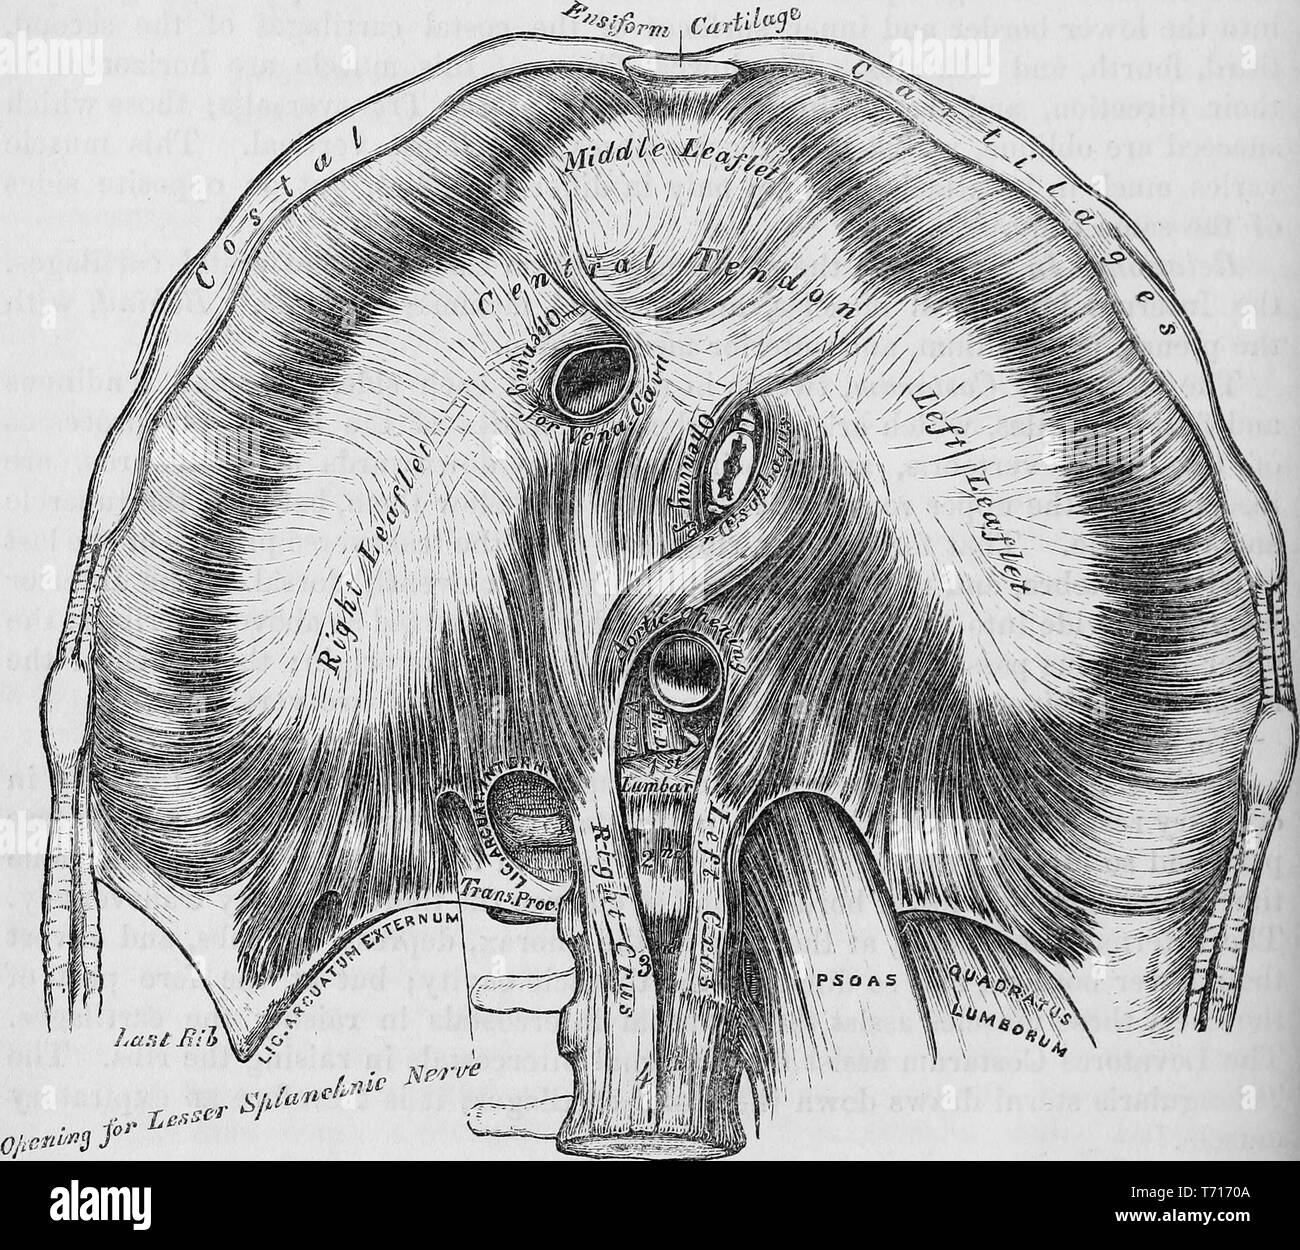 Anatomy illustration of the diaphragm, from the book 'Anatomy, descriptive and surgical' by Henry Gray, Henry Vandyke Carter, and John Guise Westmacott, 1860. Courtesy Internet Archive. () Stock Photo